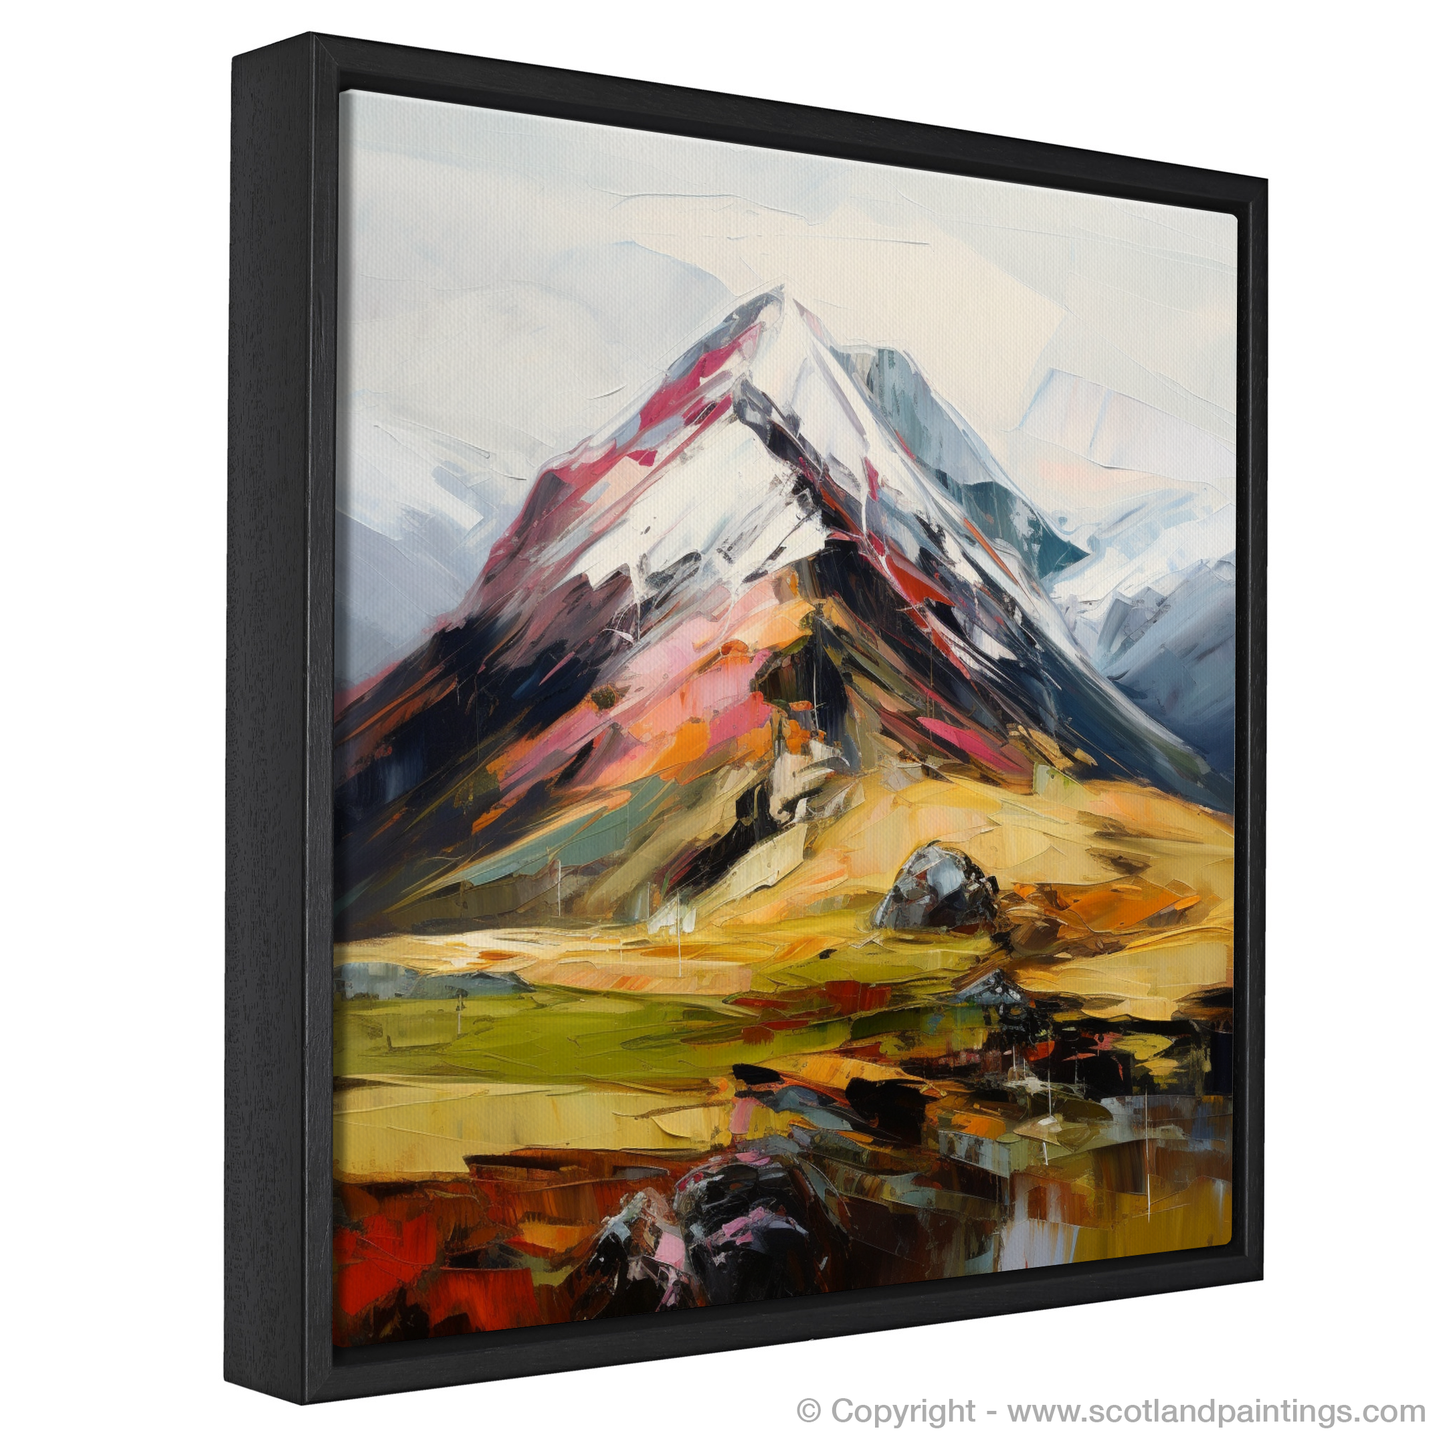 Painting and Art Print of Meall Garbh (Ben Lawers) entitled "Meall Garbh's Fiery Majesty: An Expressionist Ode to the Scottish Highlands".